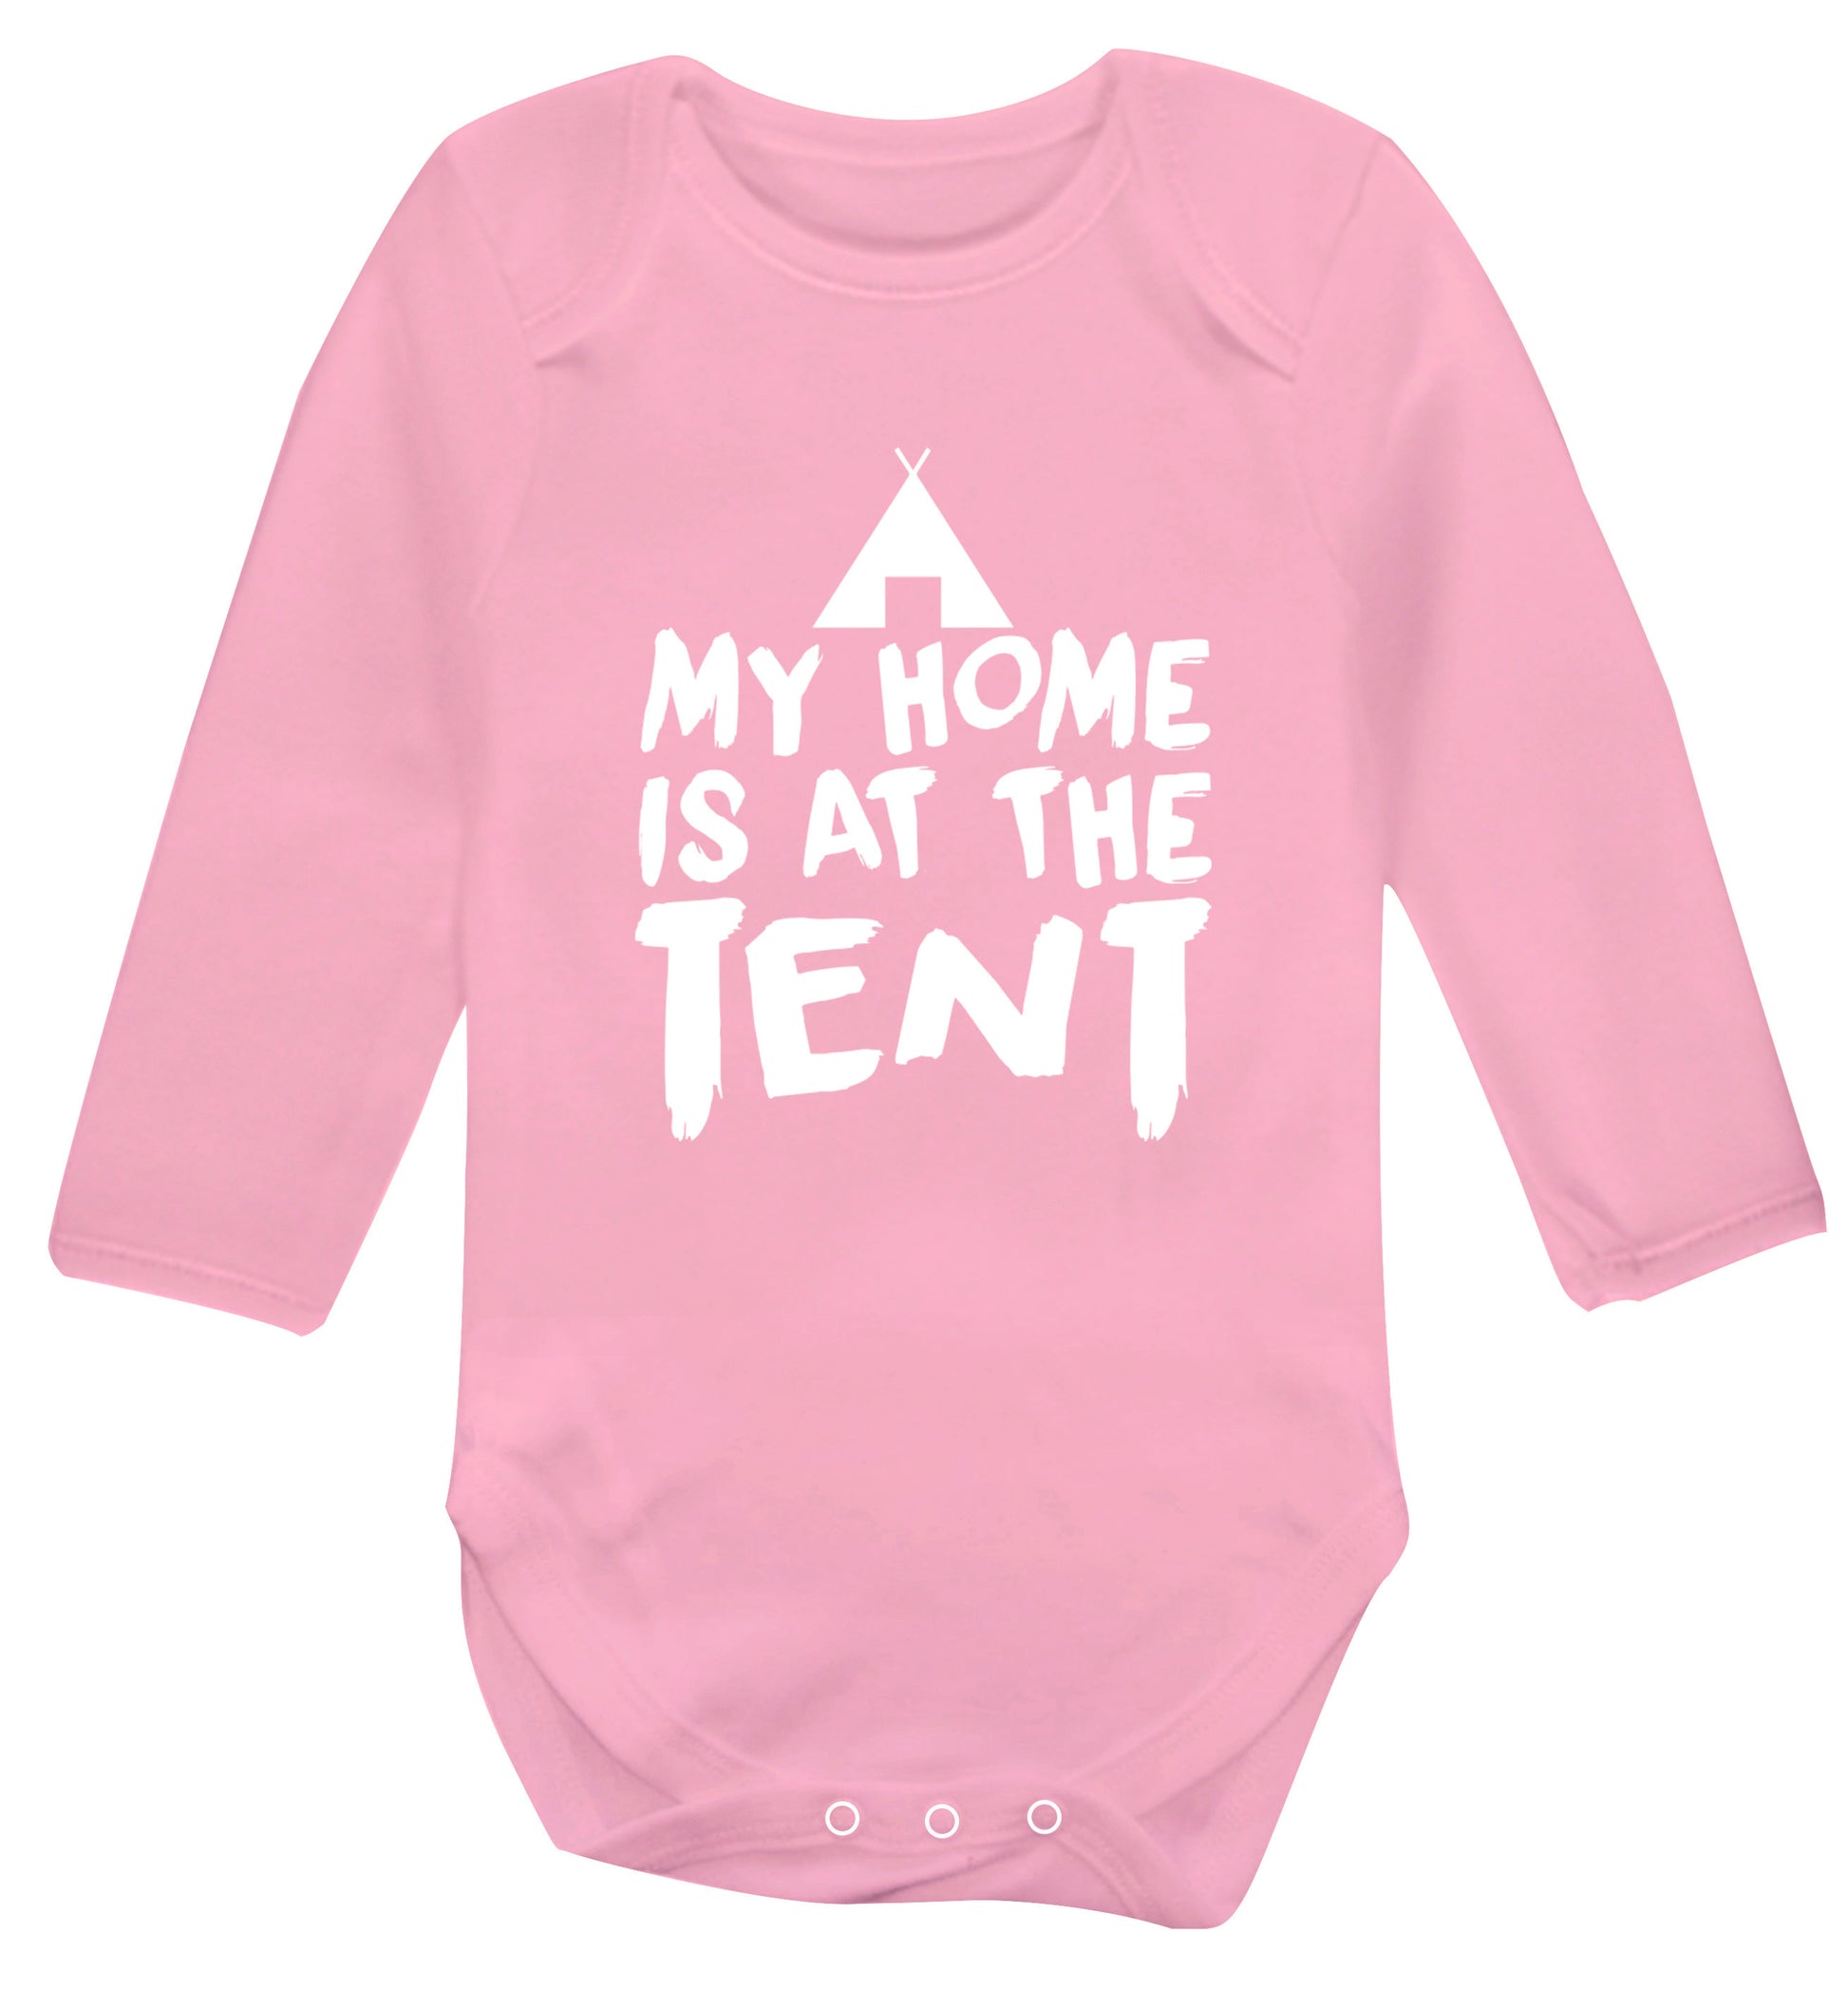 My home is at the tent Baby Vest long sleeved pale pink 6-12 months